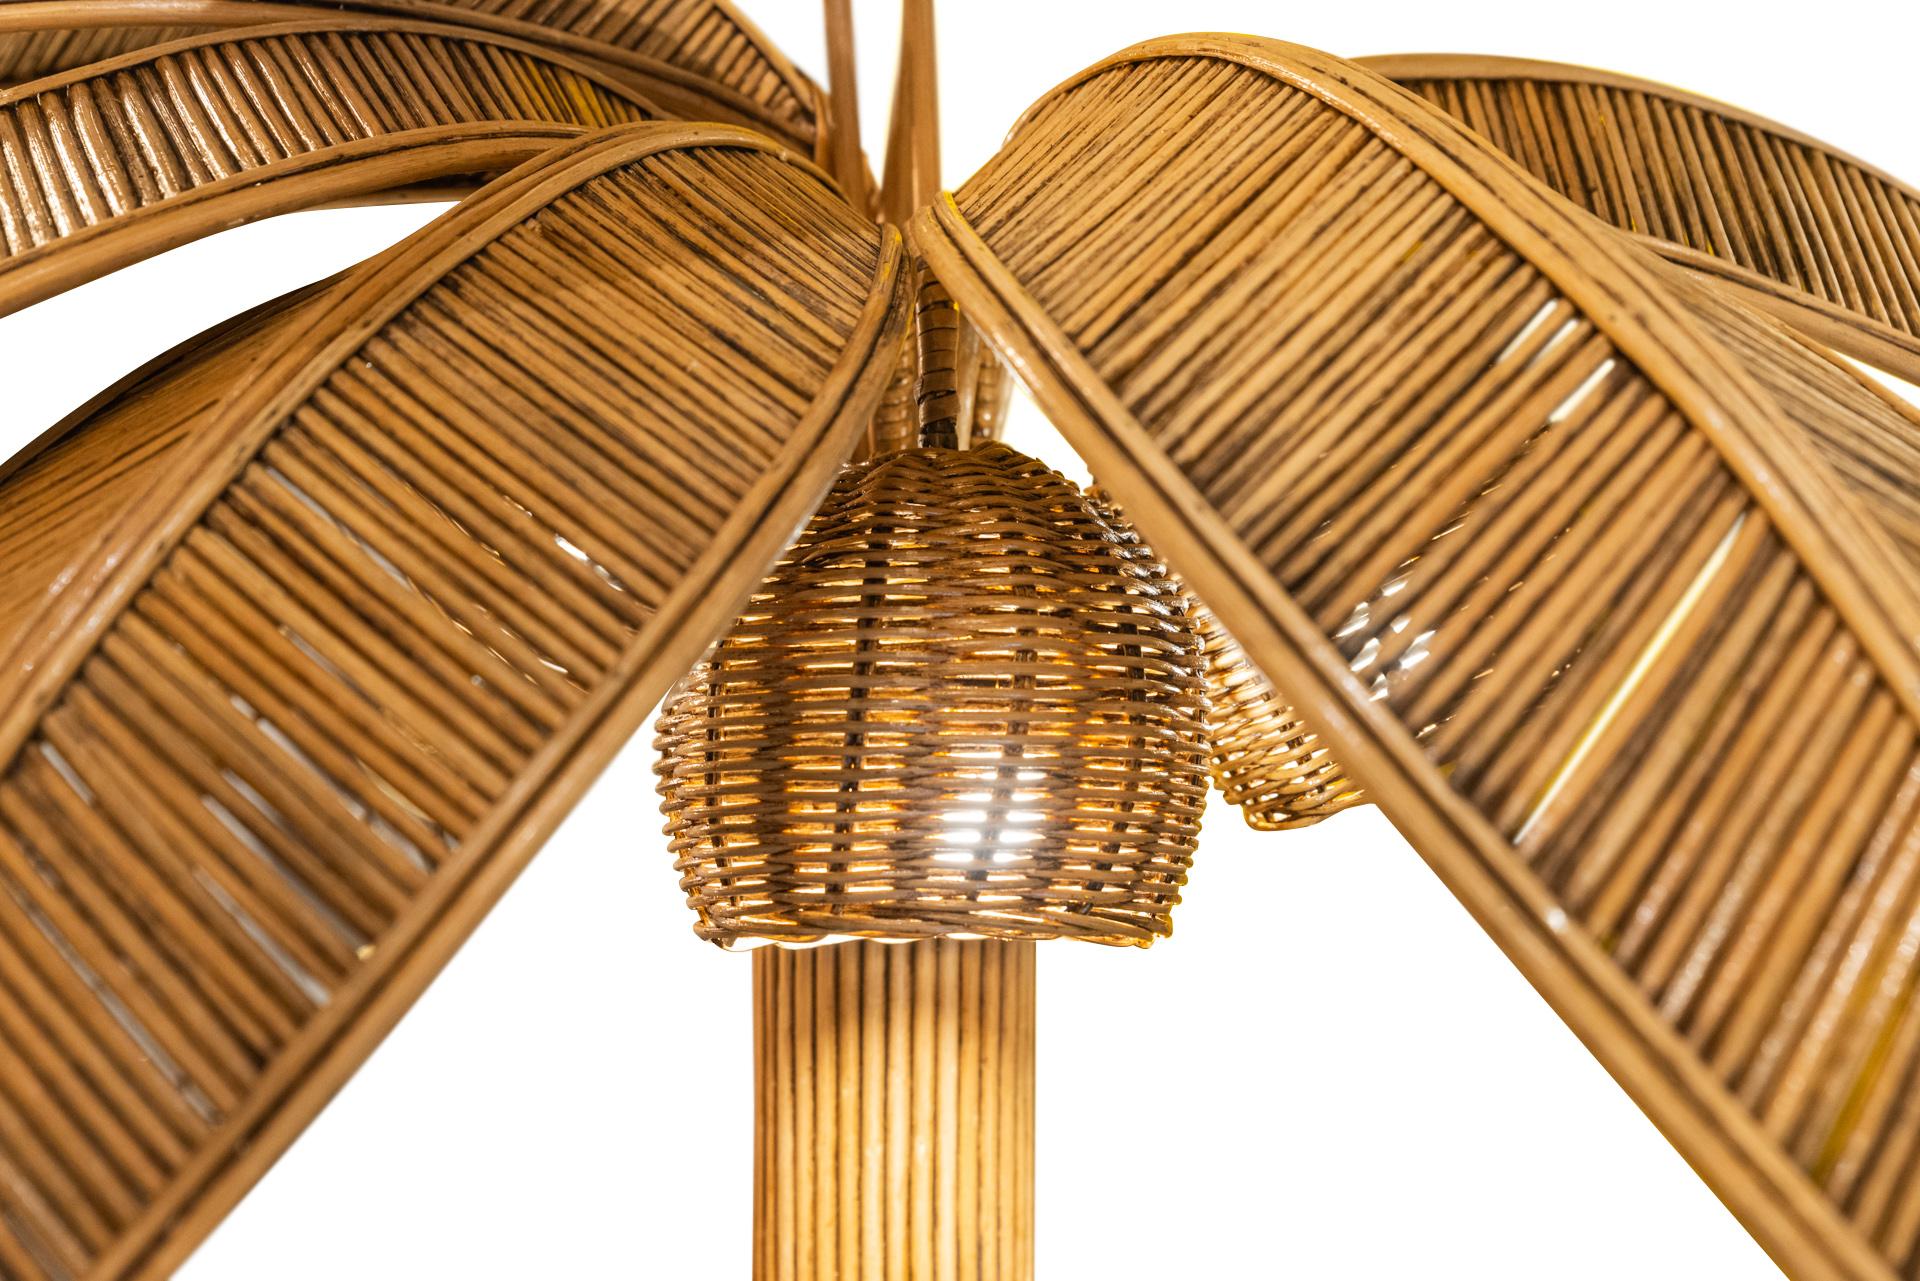 Mario Lopez Torres (1952), Coconut floor lamp,
Rattan decorated with leaves and two coconuts,
circa 1960, Mexico.

Measures : Height 200 cm, Diameter 130 cm.

Mario Lopez Torres was born in 1952 in Mexico City.
From the beginning, Mario’s attention